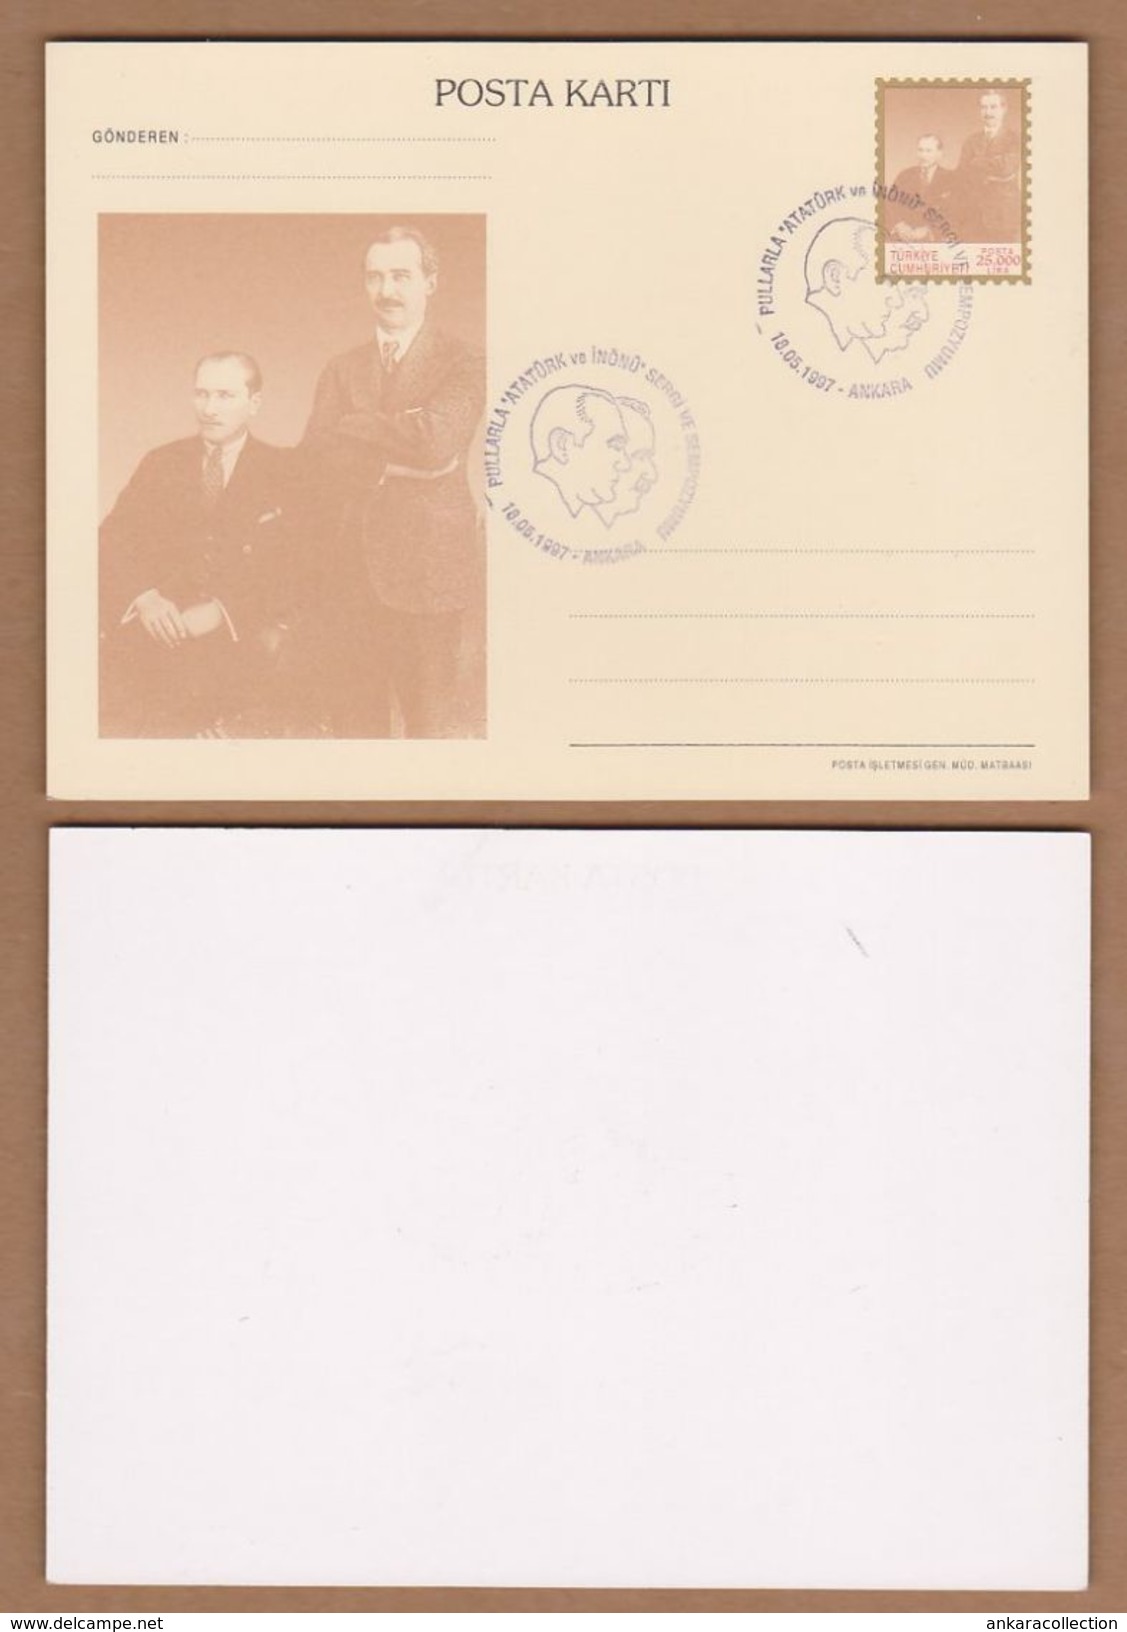 AC - TURKEY POSTAL STATIONERY - WITH THE PICTURES OF ATATURK AND INONU ON BEIGE GROUND ANKARA 25 MAY 1997 - Postal Stationery